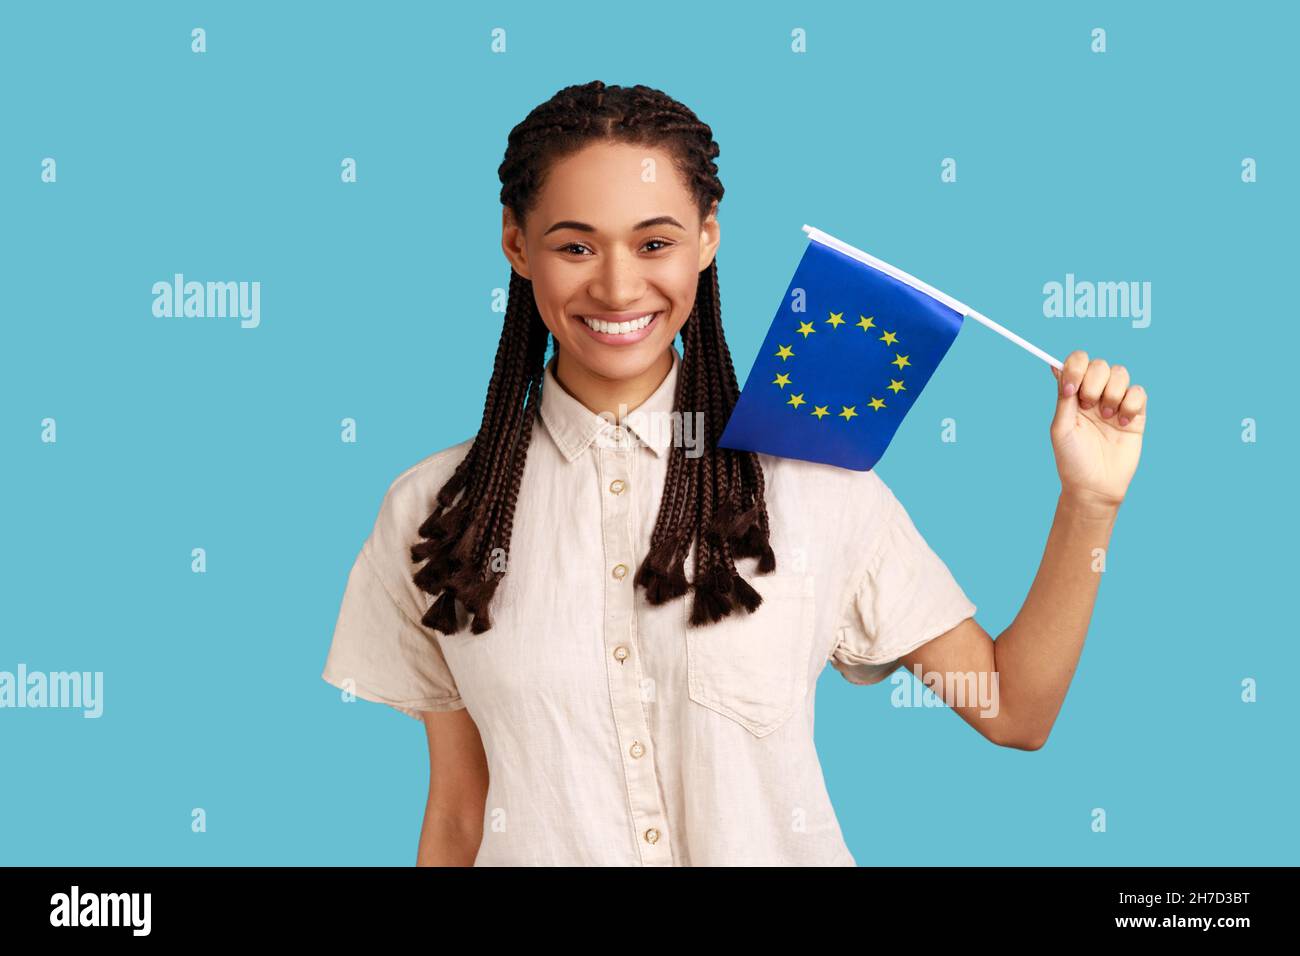 European Union flag. Adorable satisfied smiling woman with black dreadlocks holding Europe flag, looking at camera, wearing white shirt. Indoor studio shot isolated on blue background. Stock Photo